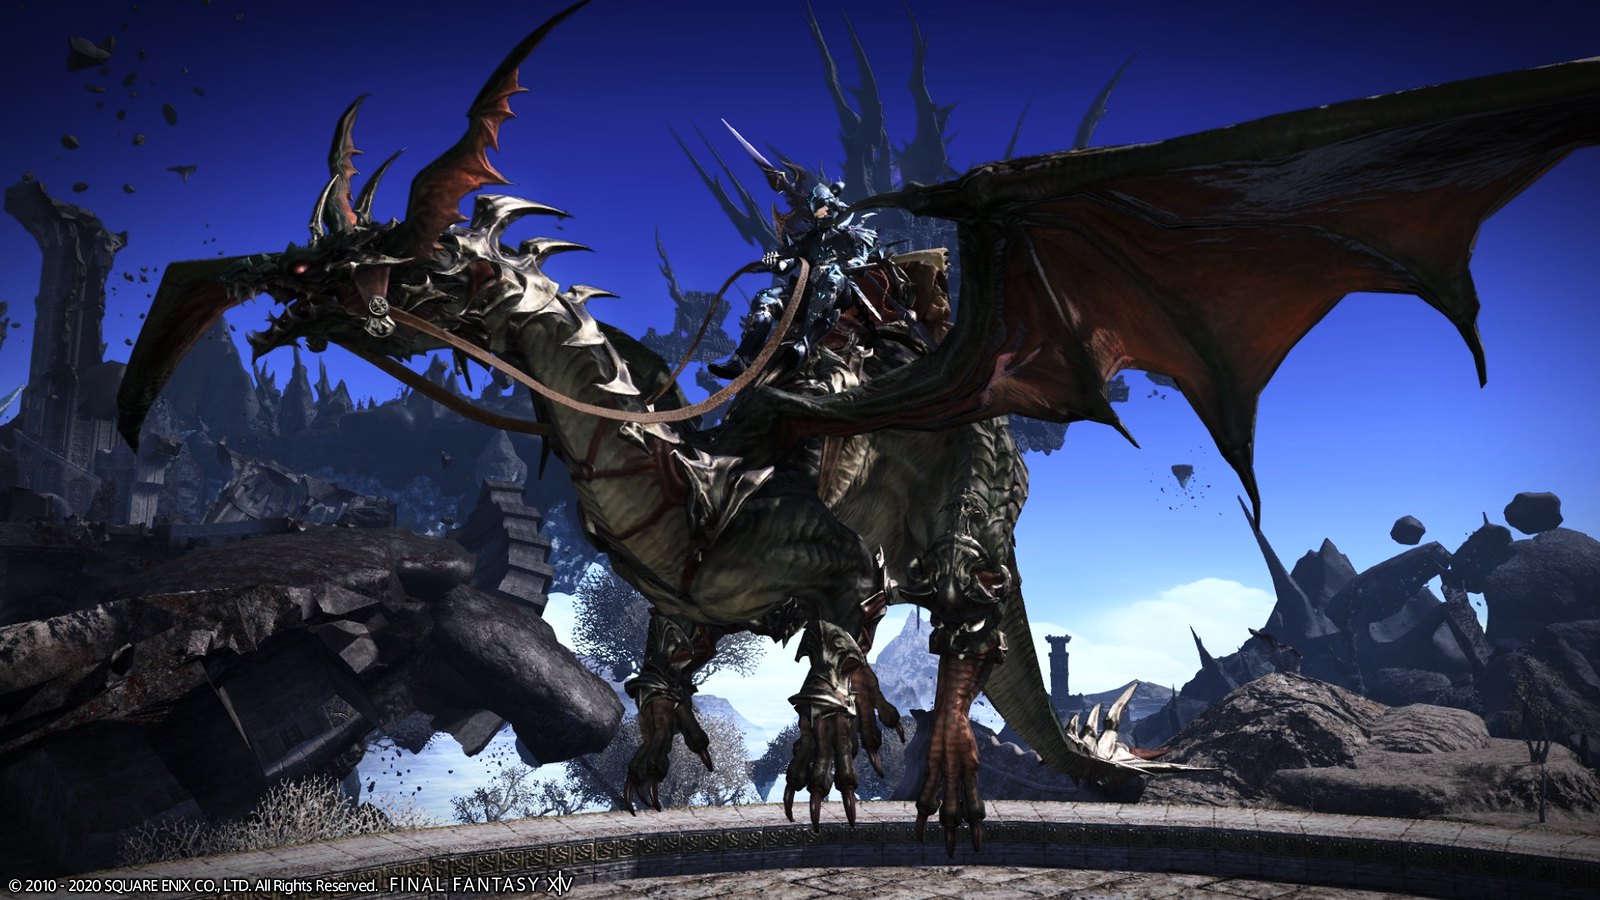 Final Fantasy XIV online patch 5.3 Live tomorrow with major updates for newcomers